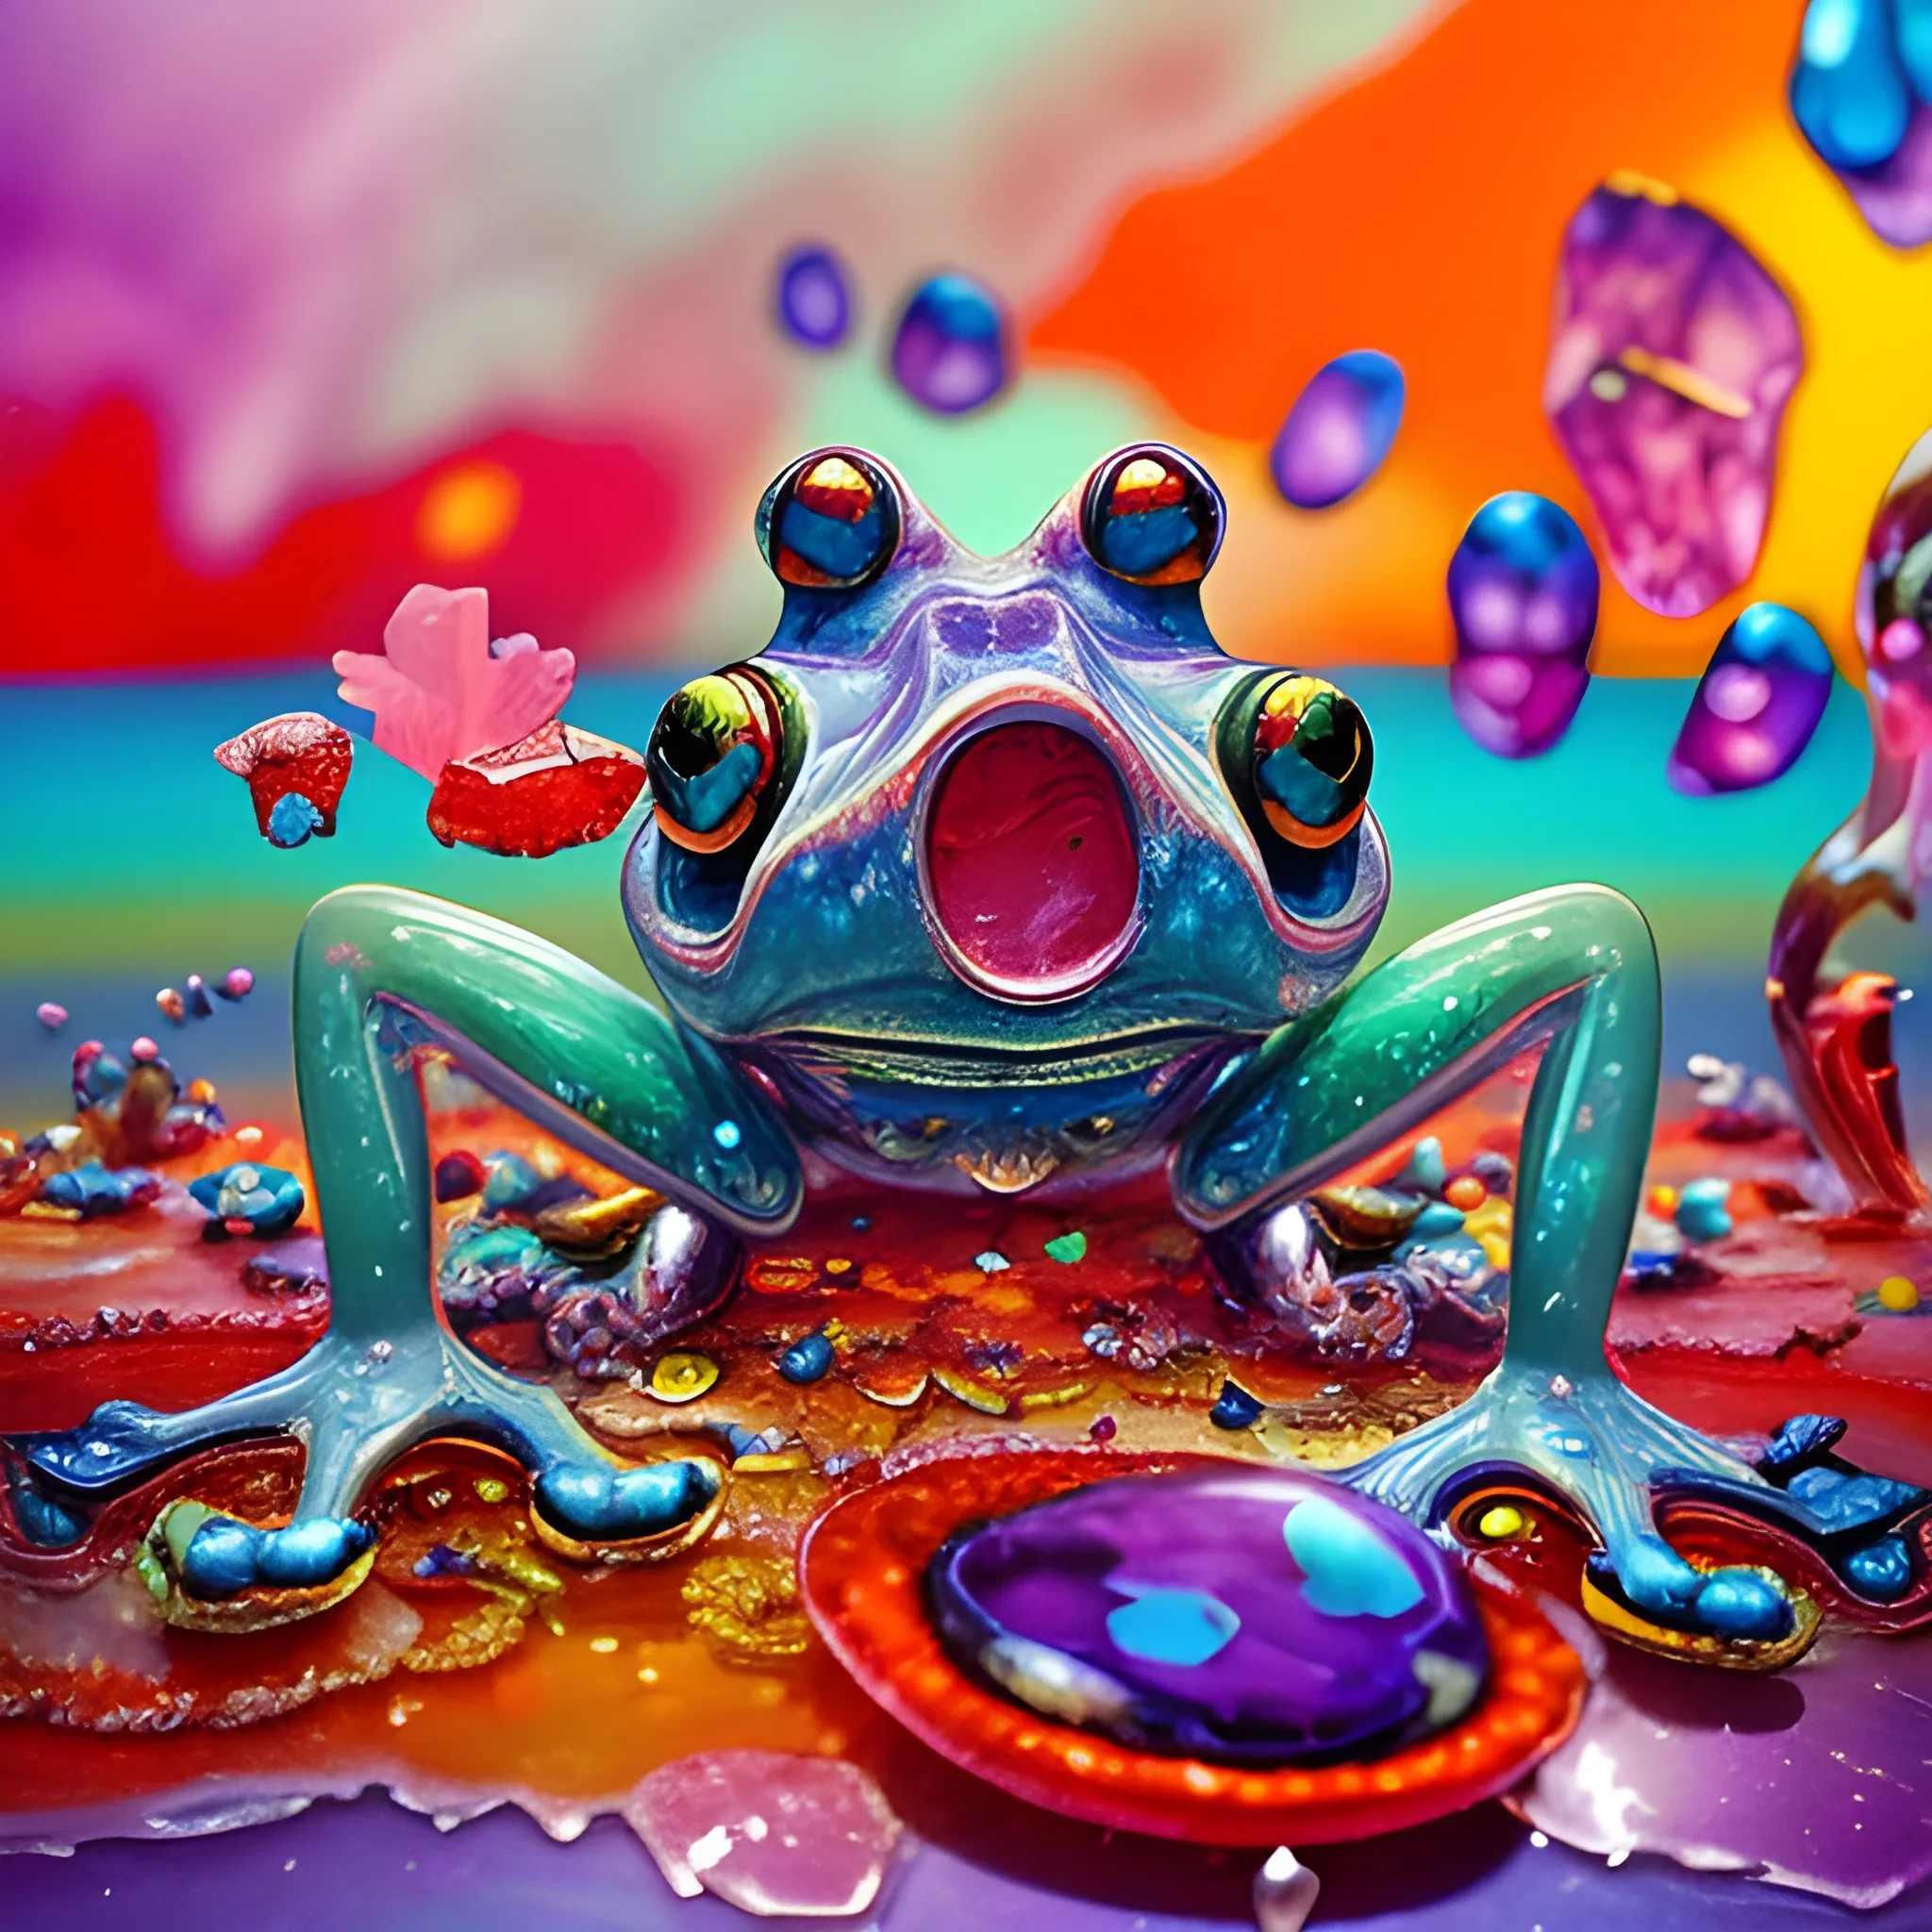 make a sculpture of many crystal crazy frogs, poppies around, many broken glass in the air, saturated colors
surrealism, chaotic background, 3D, Trippy,  eerie atmosphere, close up, Oil Painting, aerial perspective 